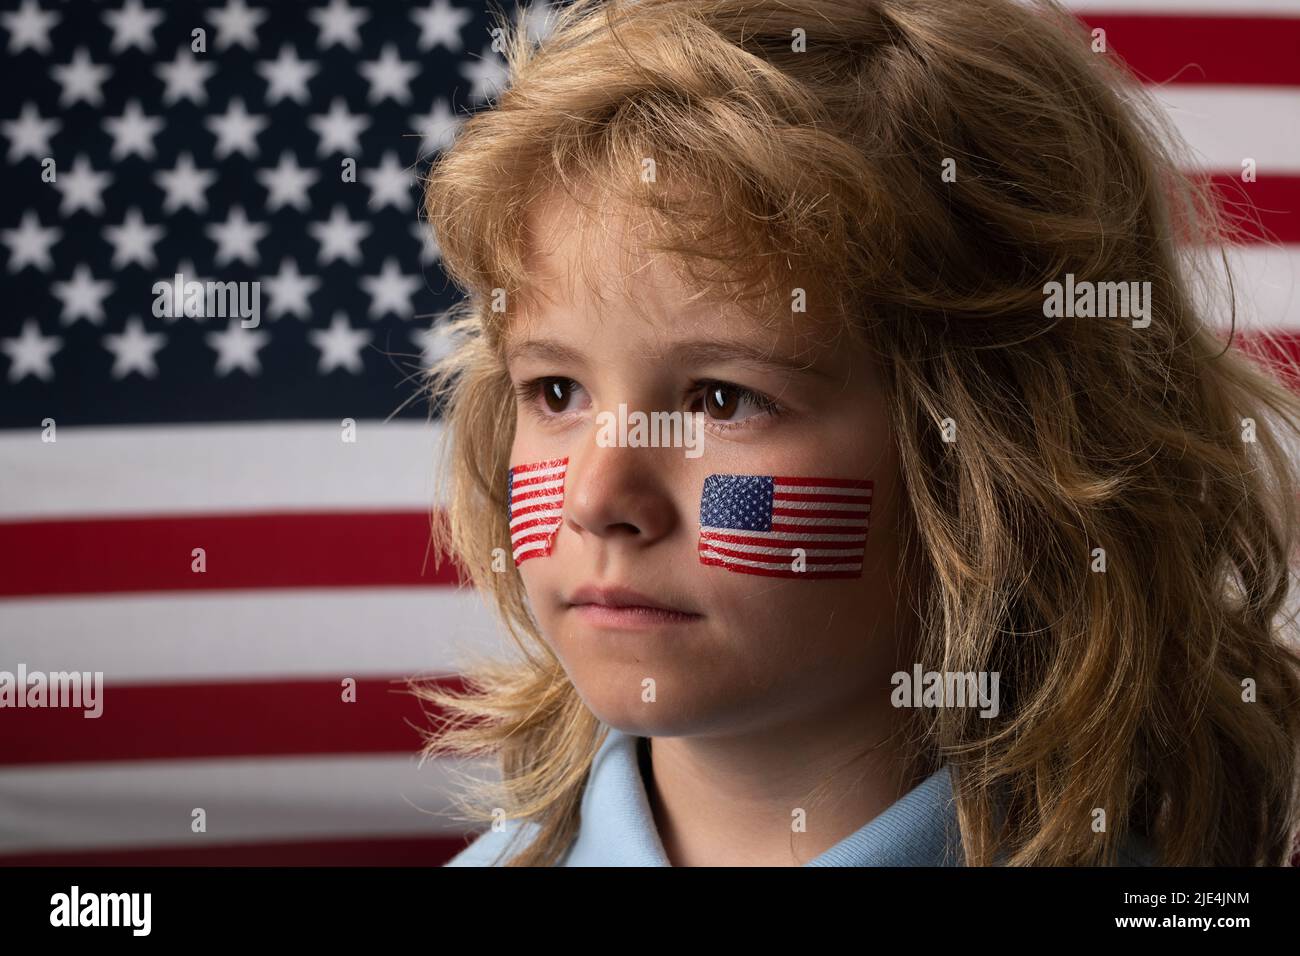 Independence day 4th of july. Child with american flag. American flag on kids cheek. Stock Photo